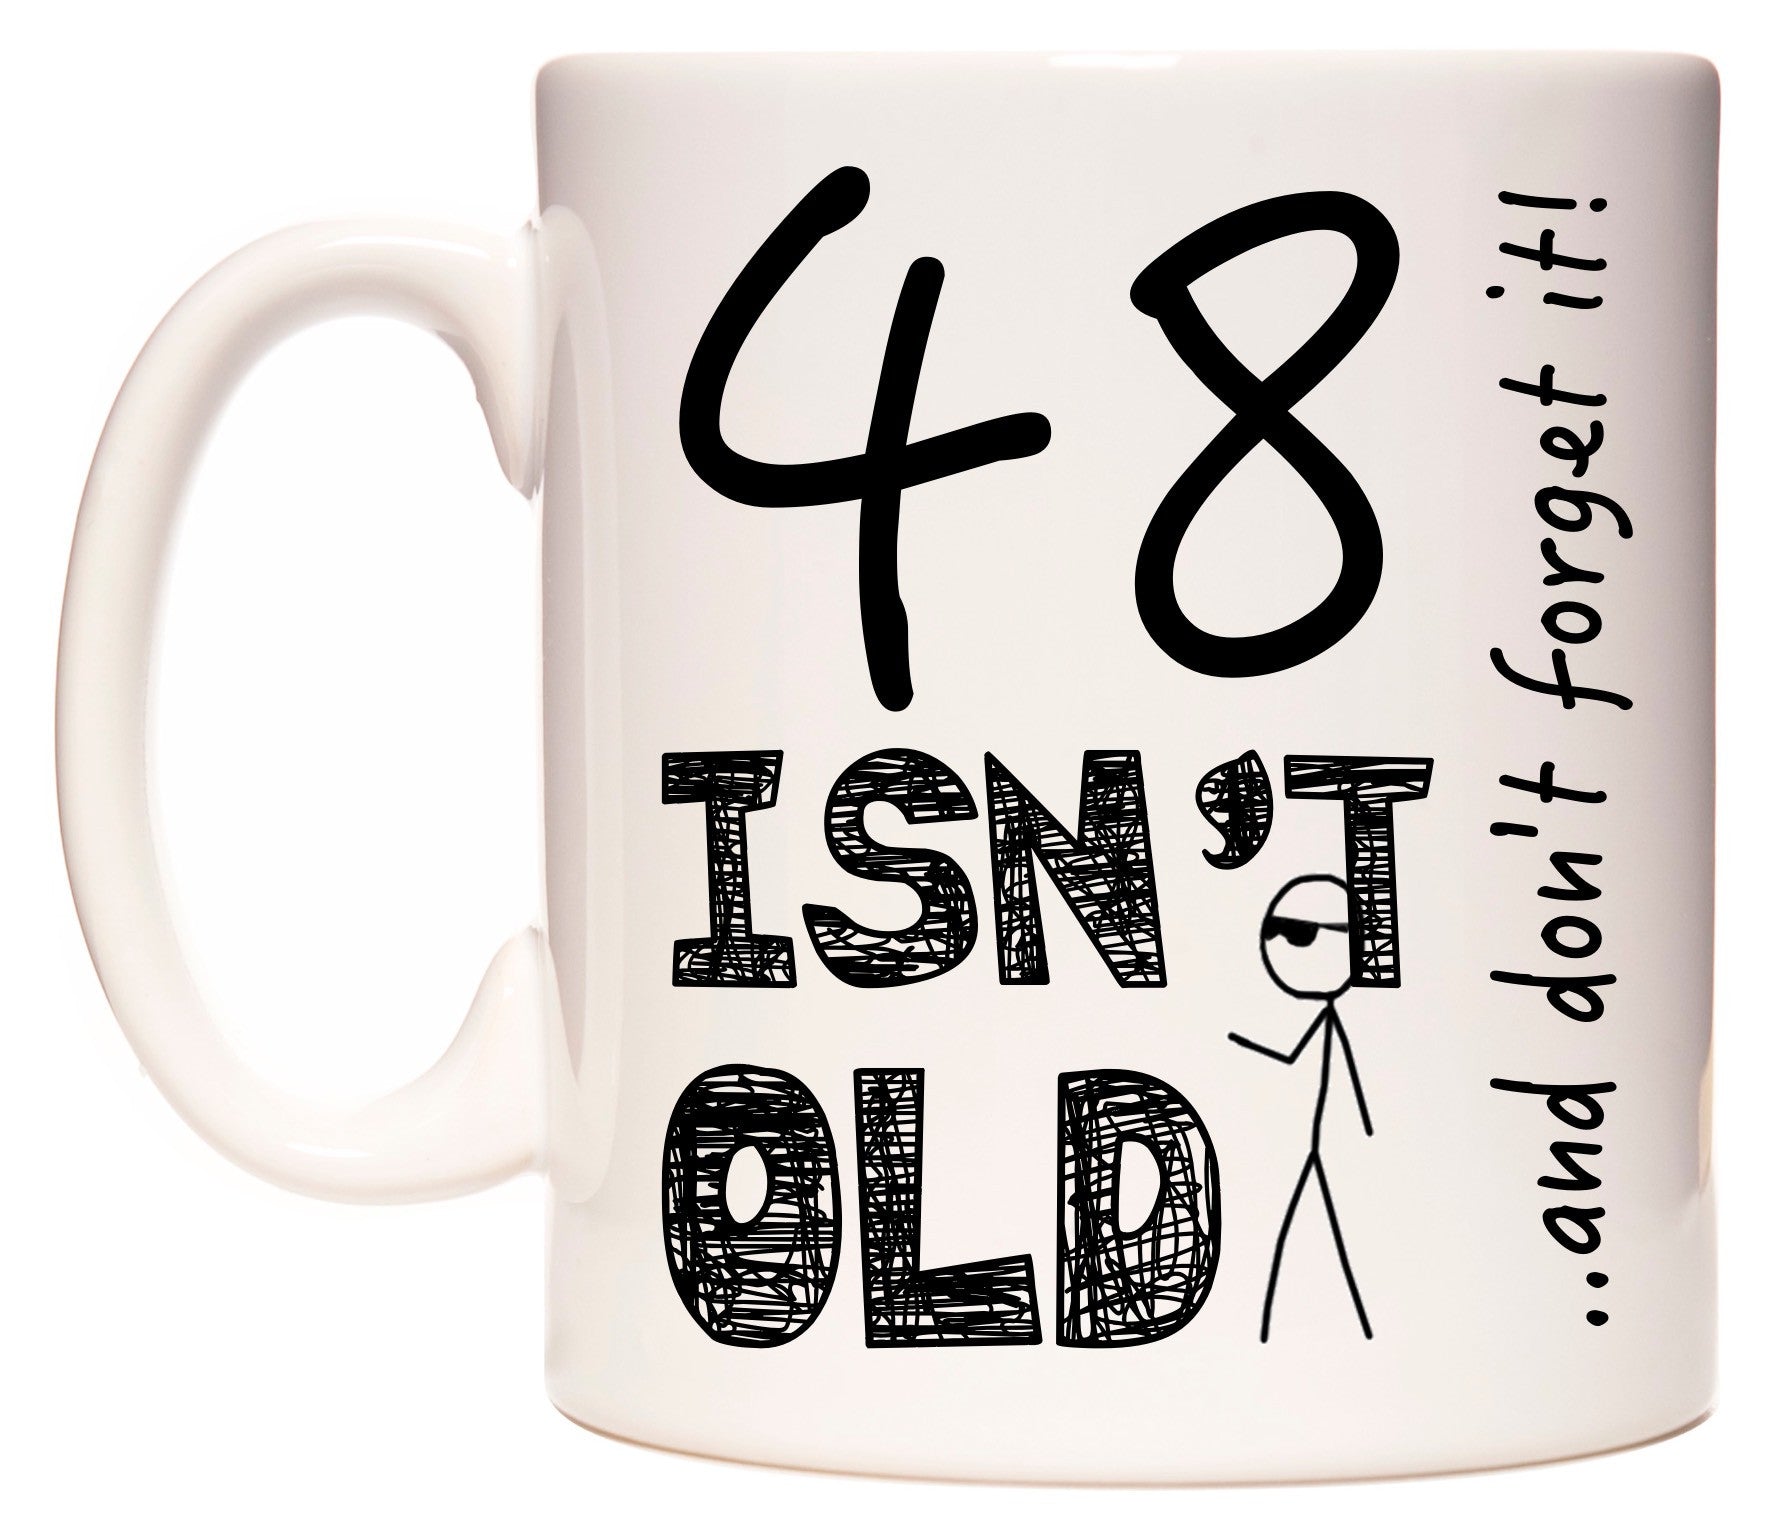 This mug features 48 Isn't Old